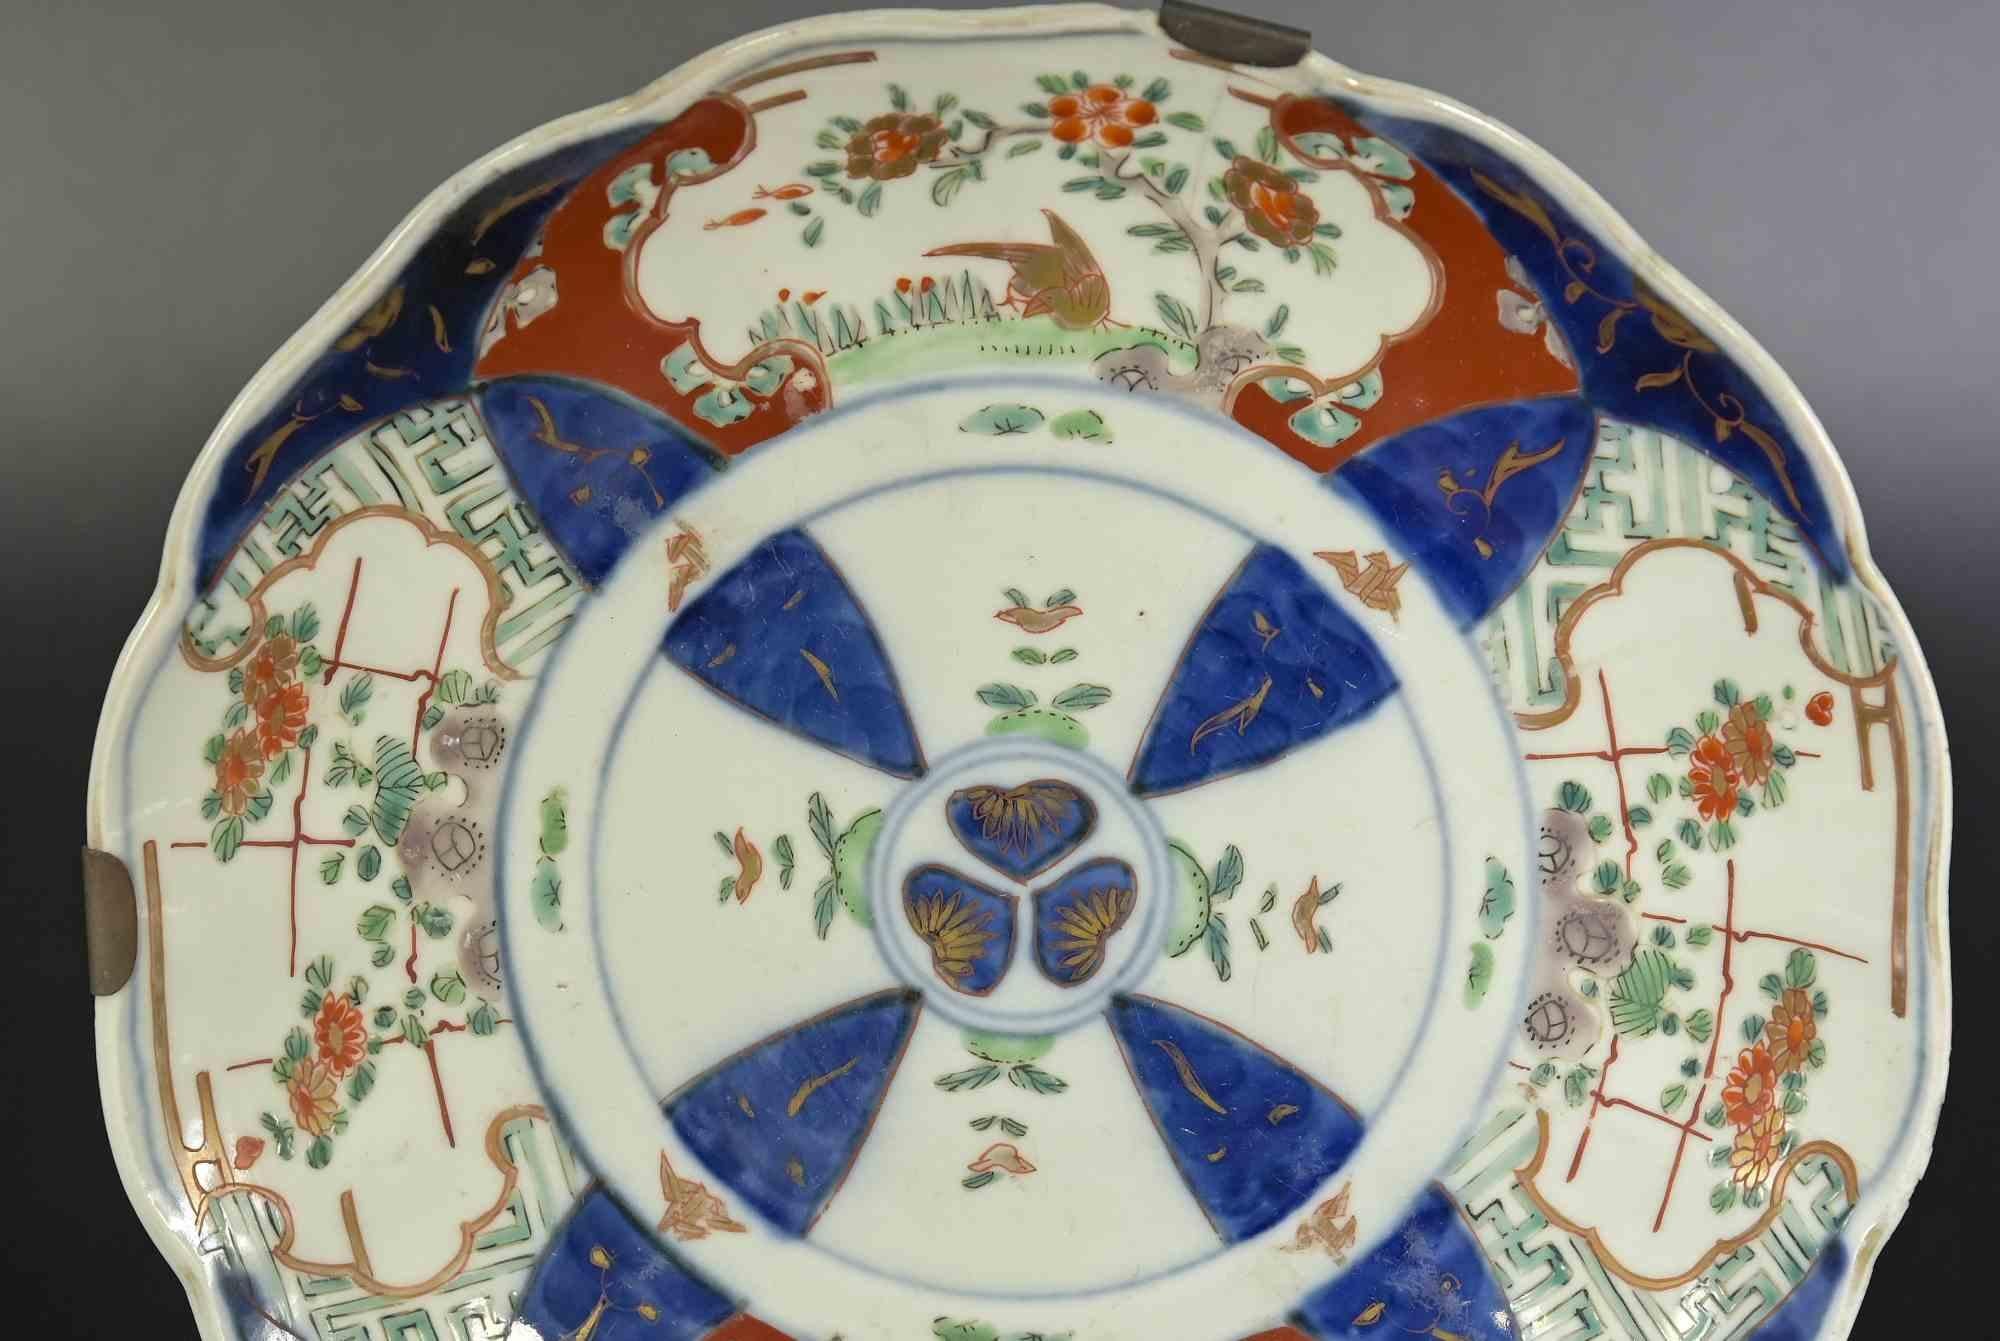 Chinese ceramic plate, China late 19th century.

Iron hook on the back 

Plate diameter 22 cm.

Good conditions except for a minor loss on top edge.